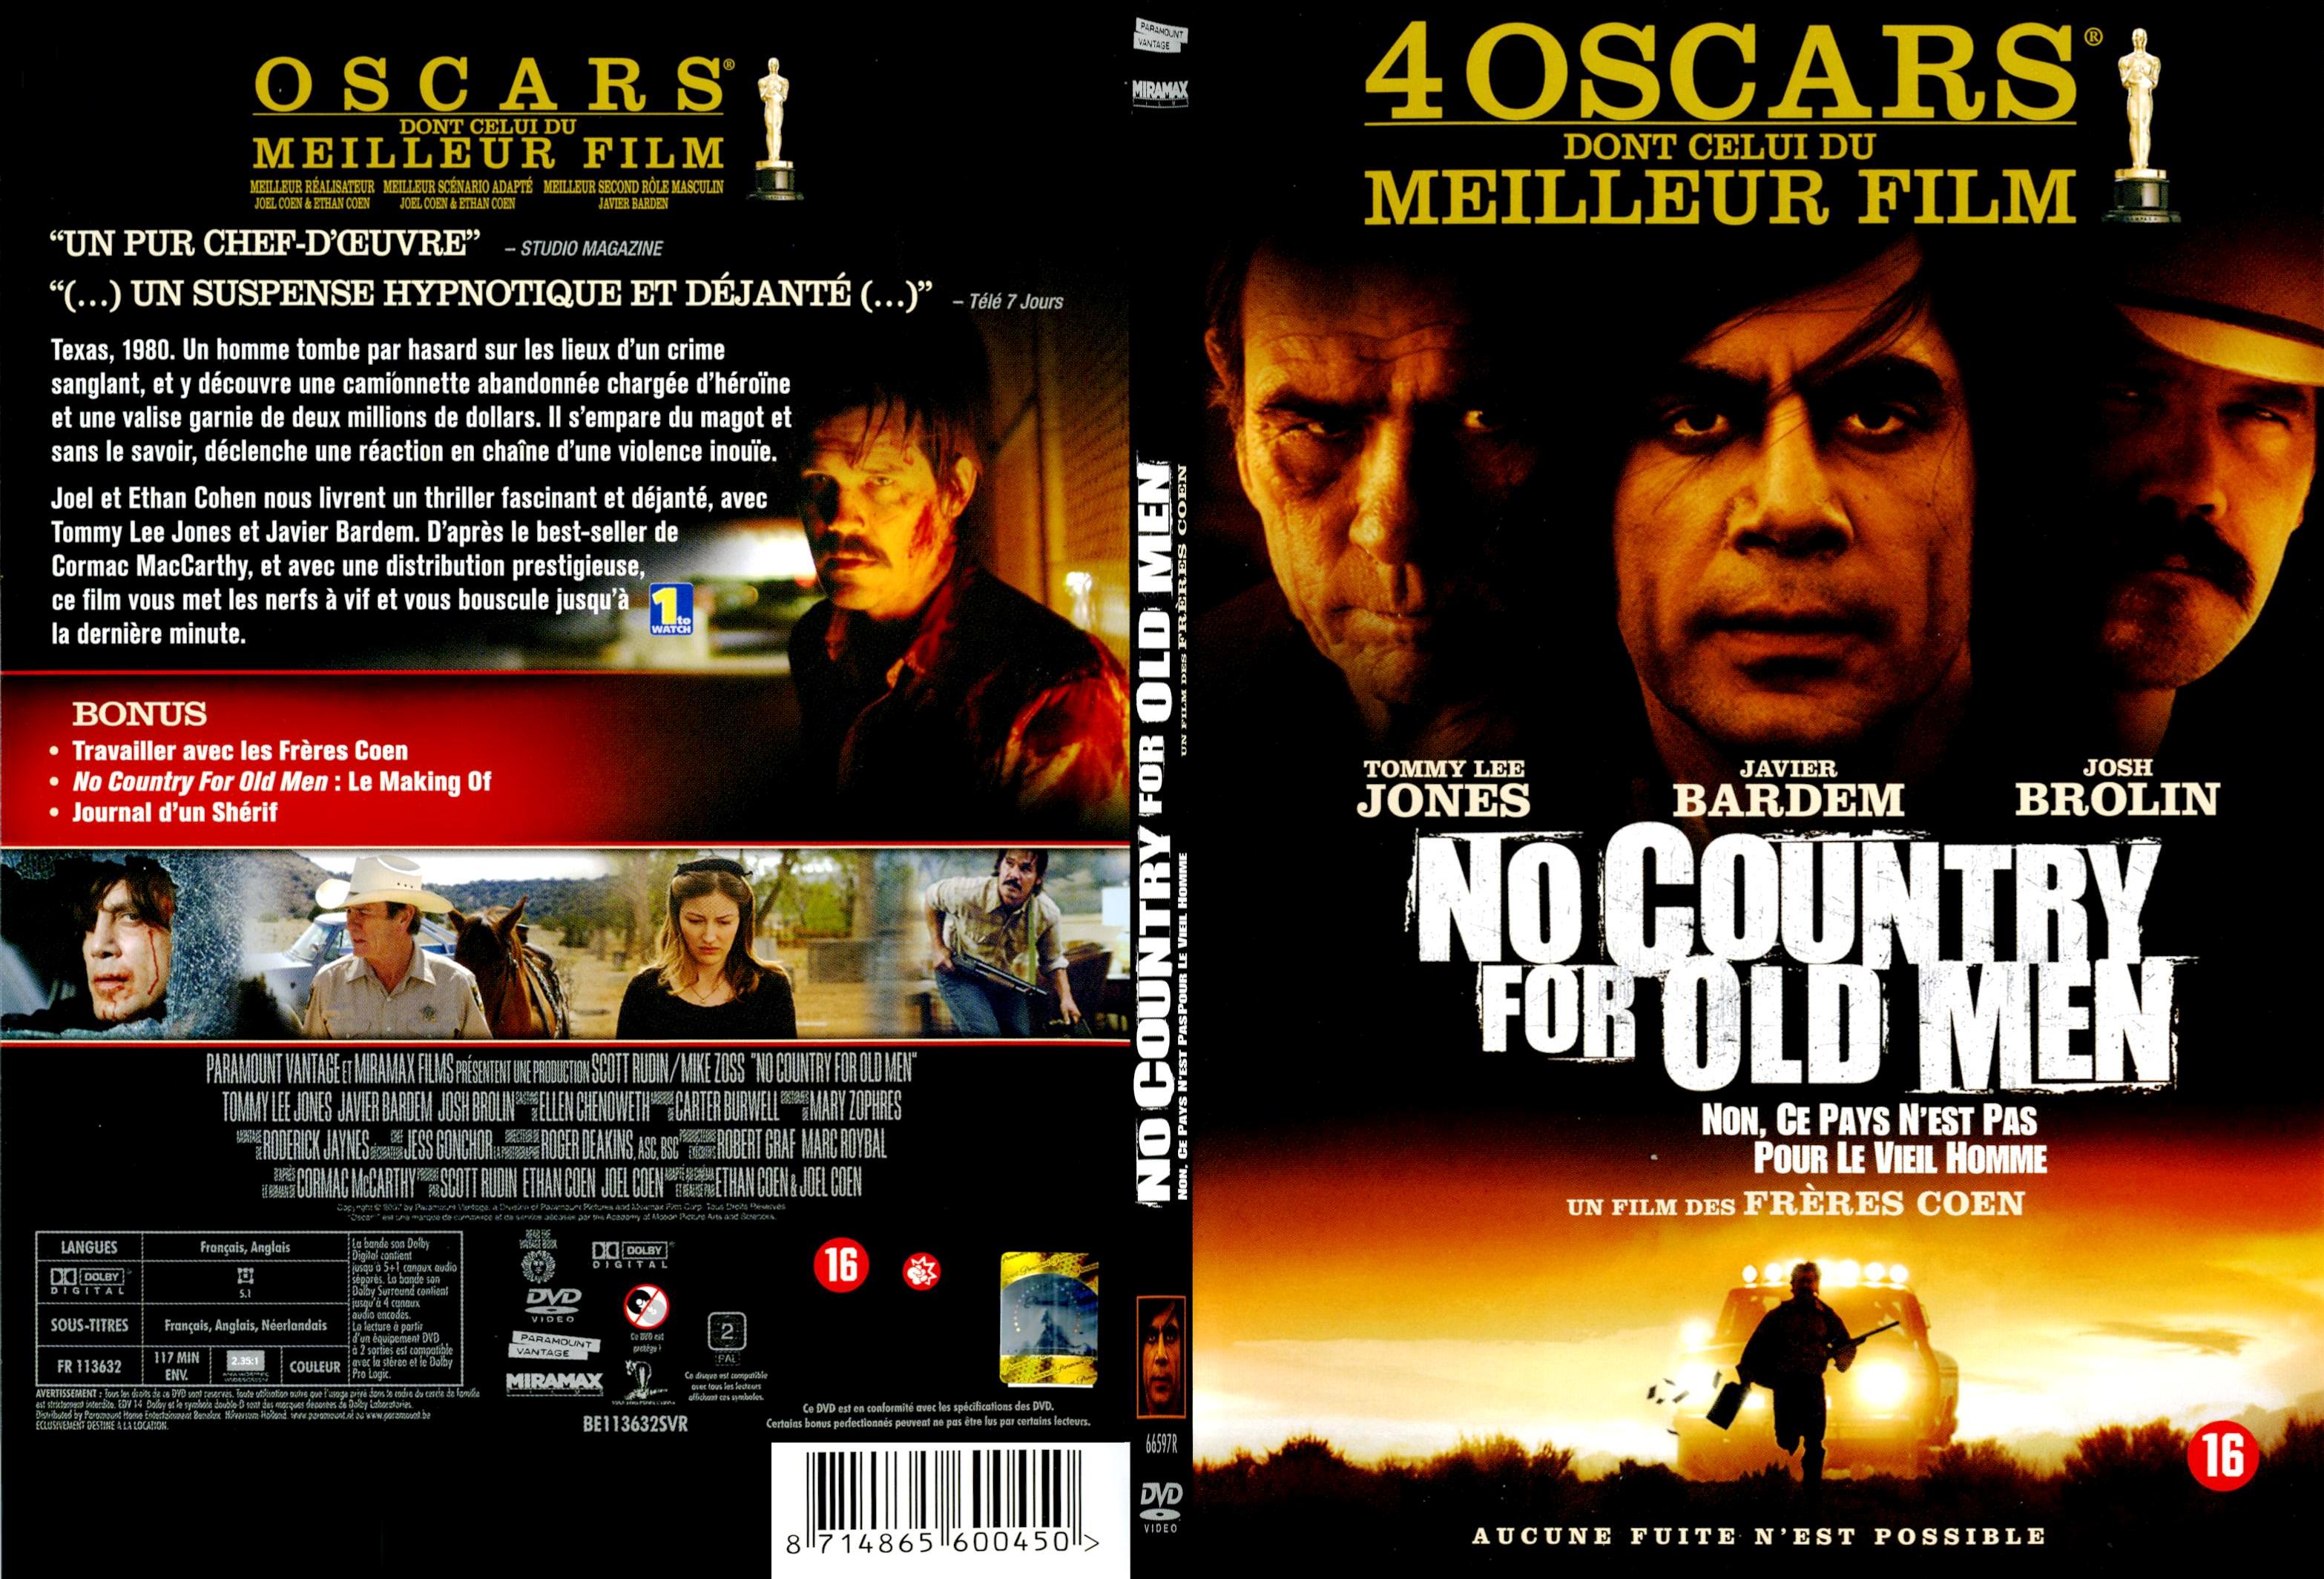 Jaquette DVD No country for old men - SLIM